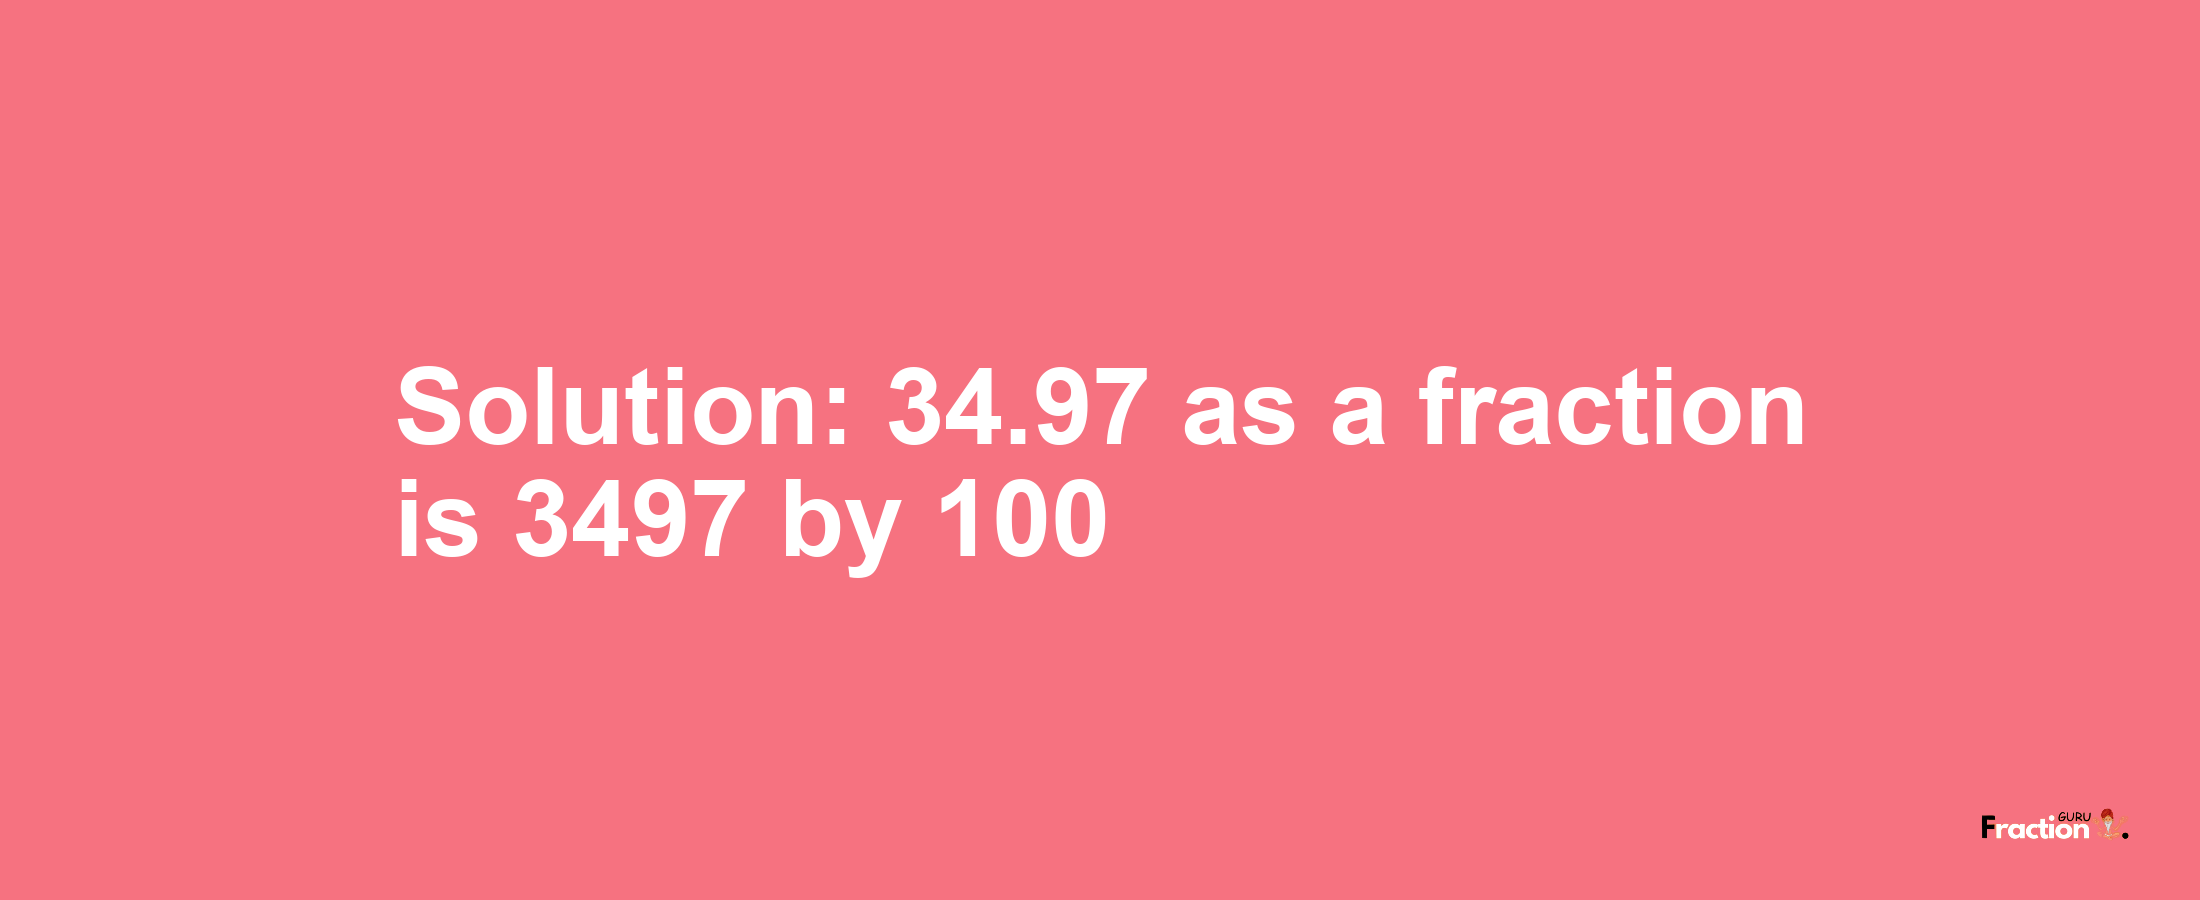 Solution:34.97 as a fraction is 3497/100